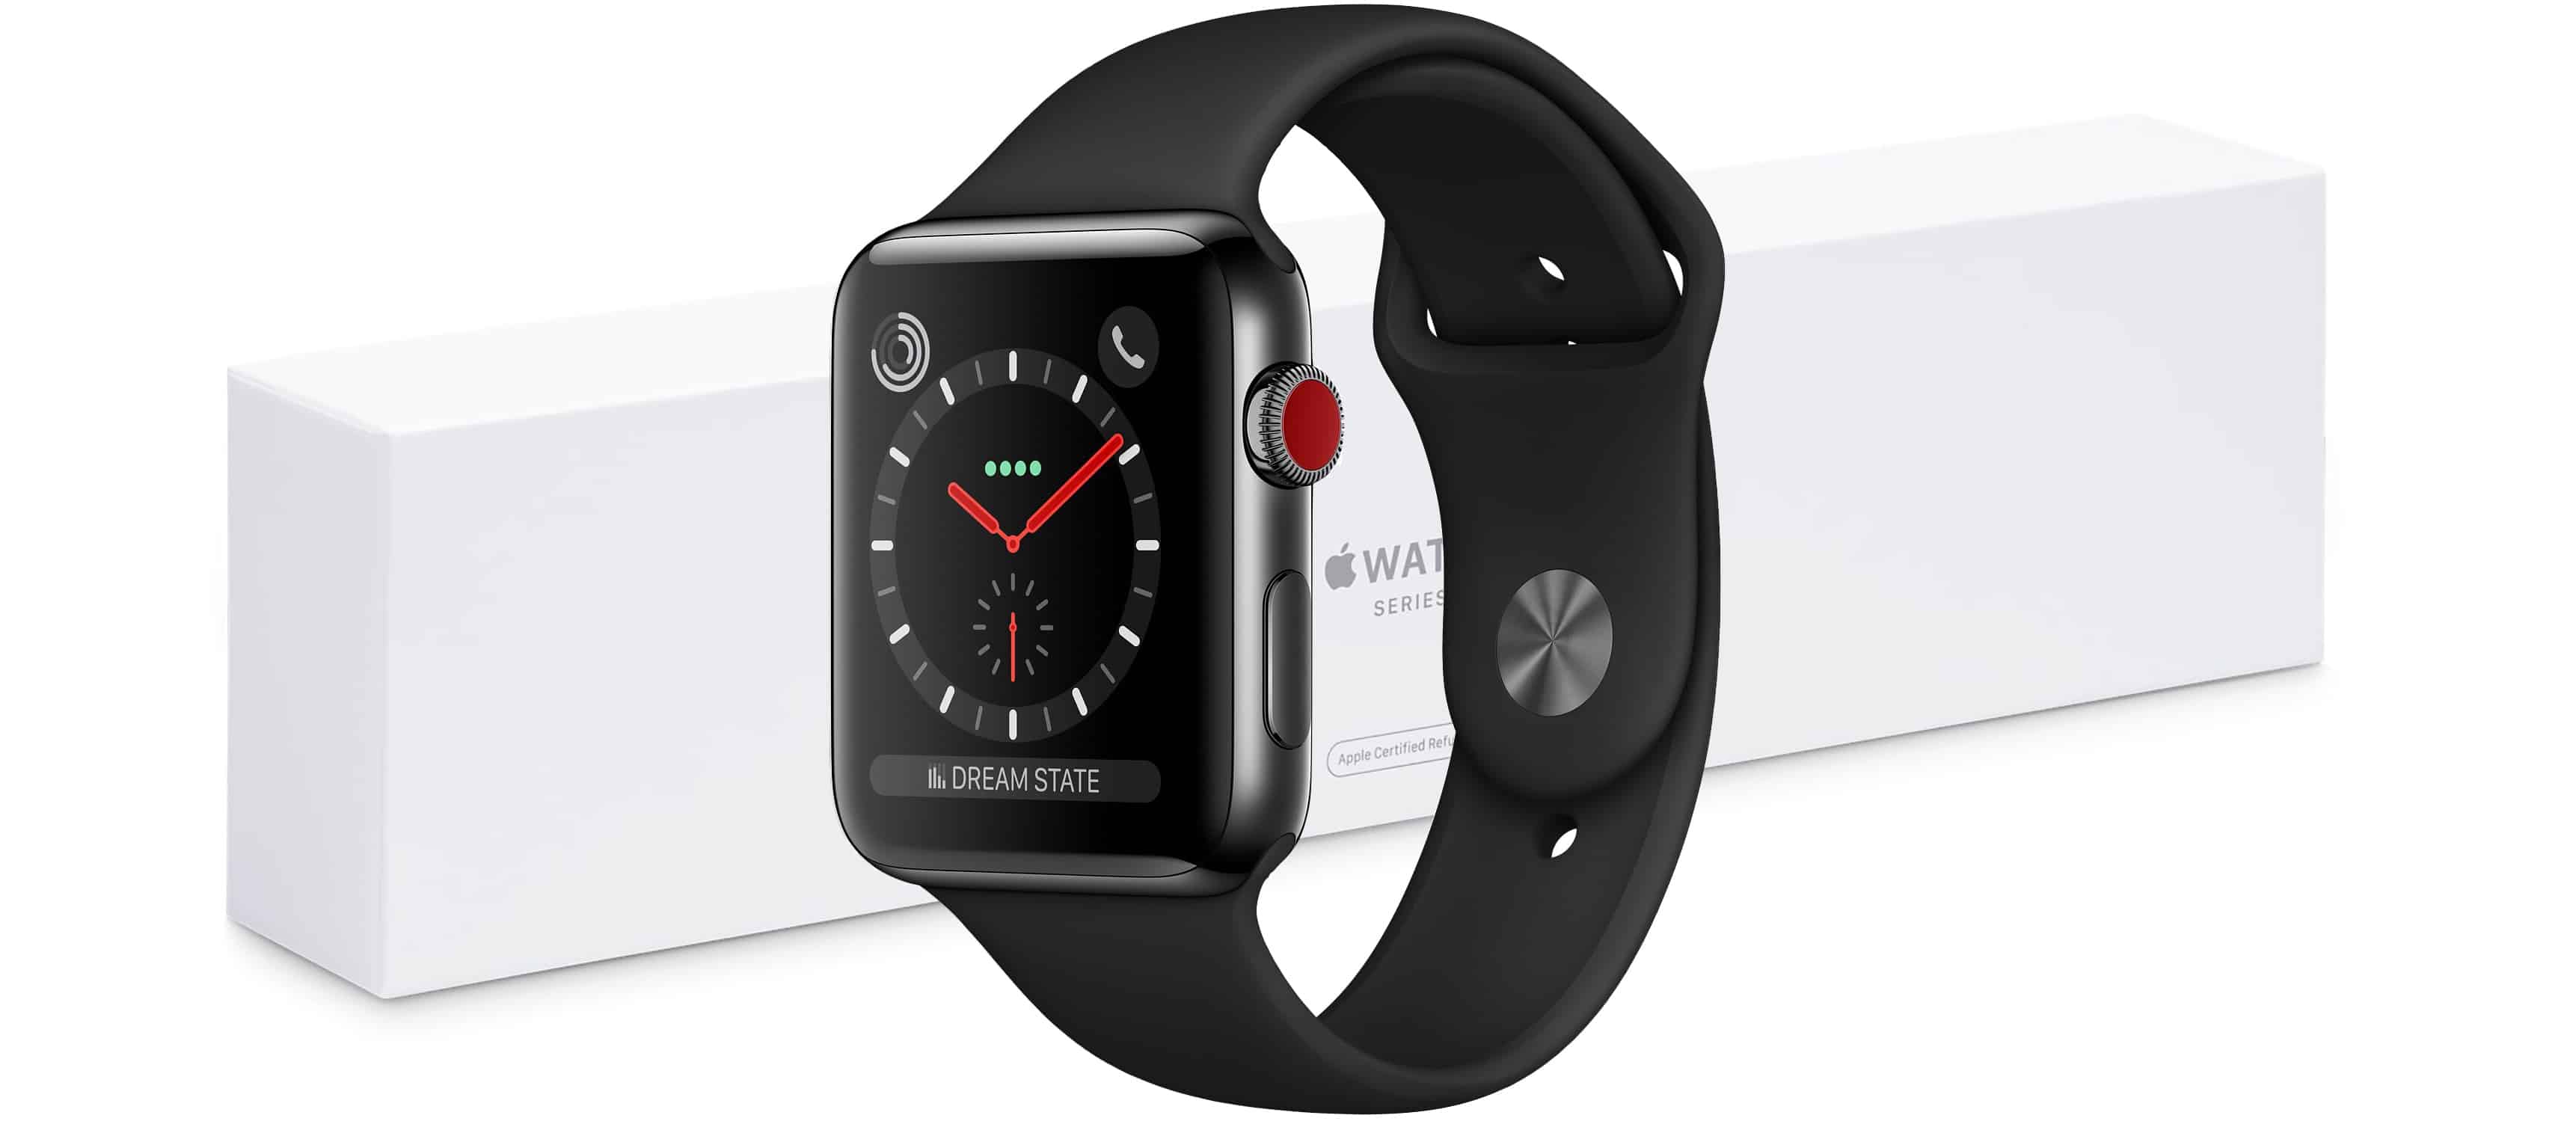 Refurbished Apple Watch LTE units are available.